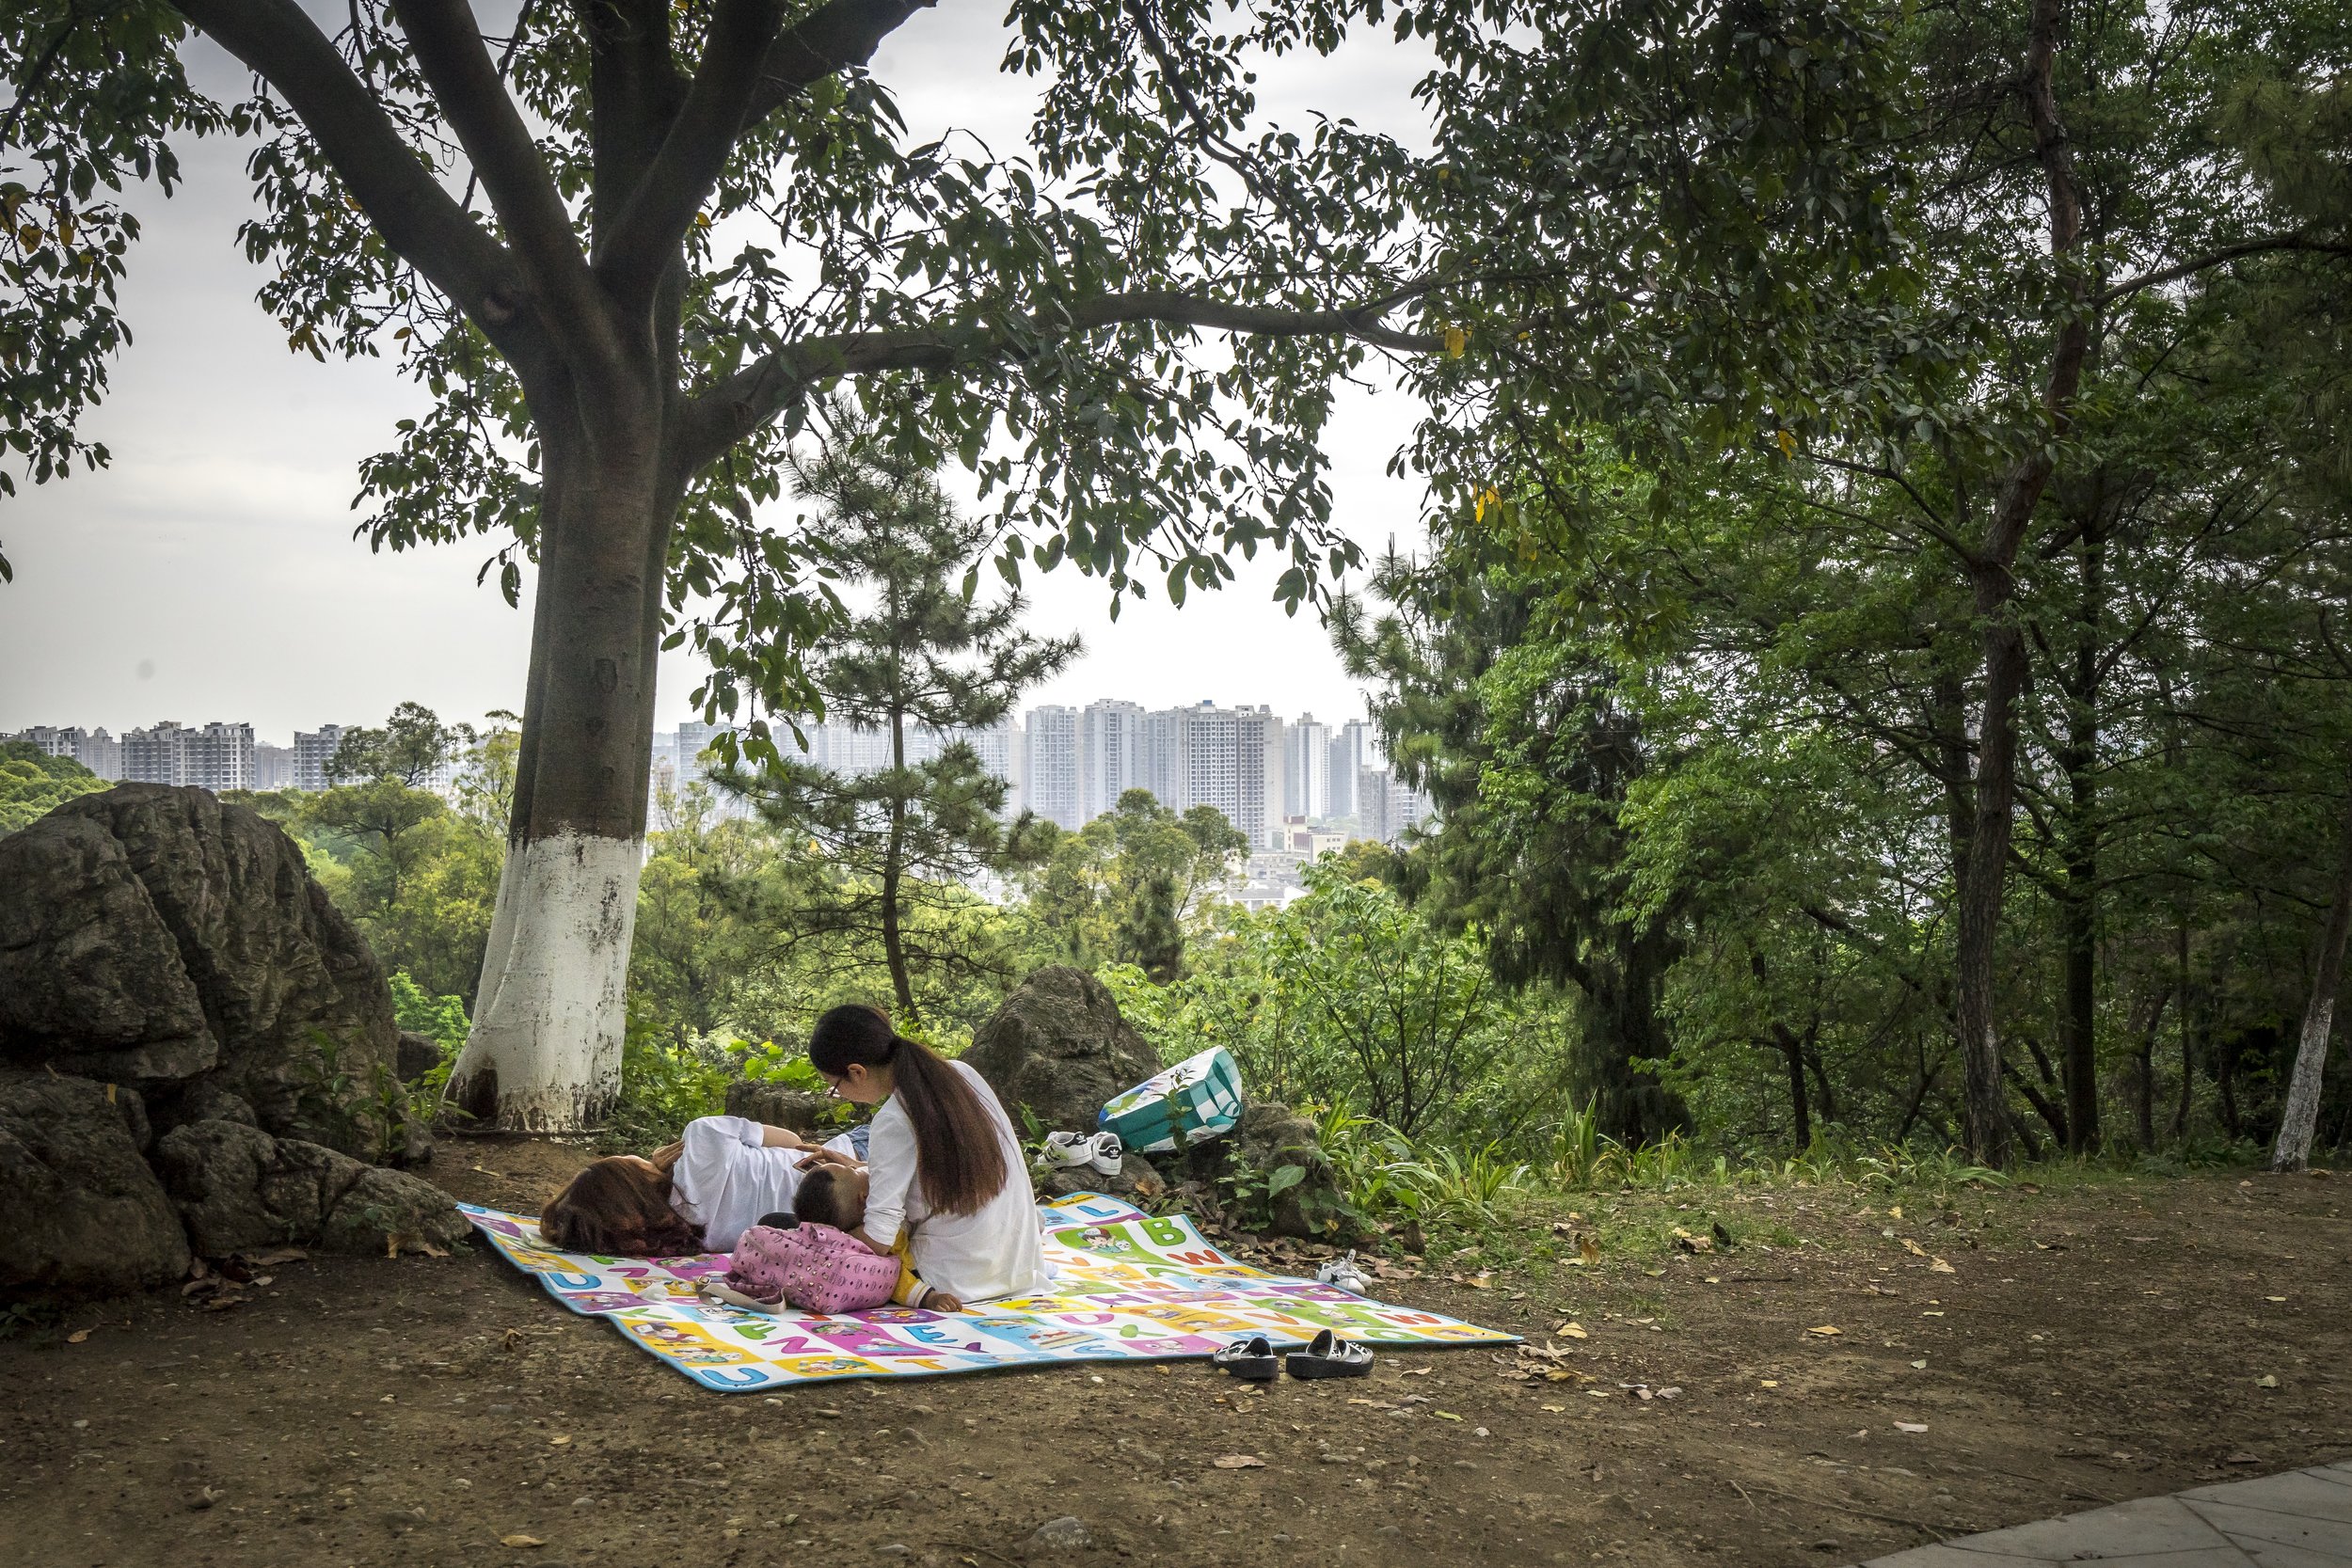  A local park in Mianyang provides residents with a space to relax and escape the hustle and bustle of the city. Views from this lookout have changed rapidly in the last few decades. China has moved quickly to build up the skyline by filling cities w